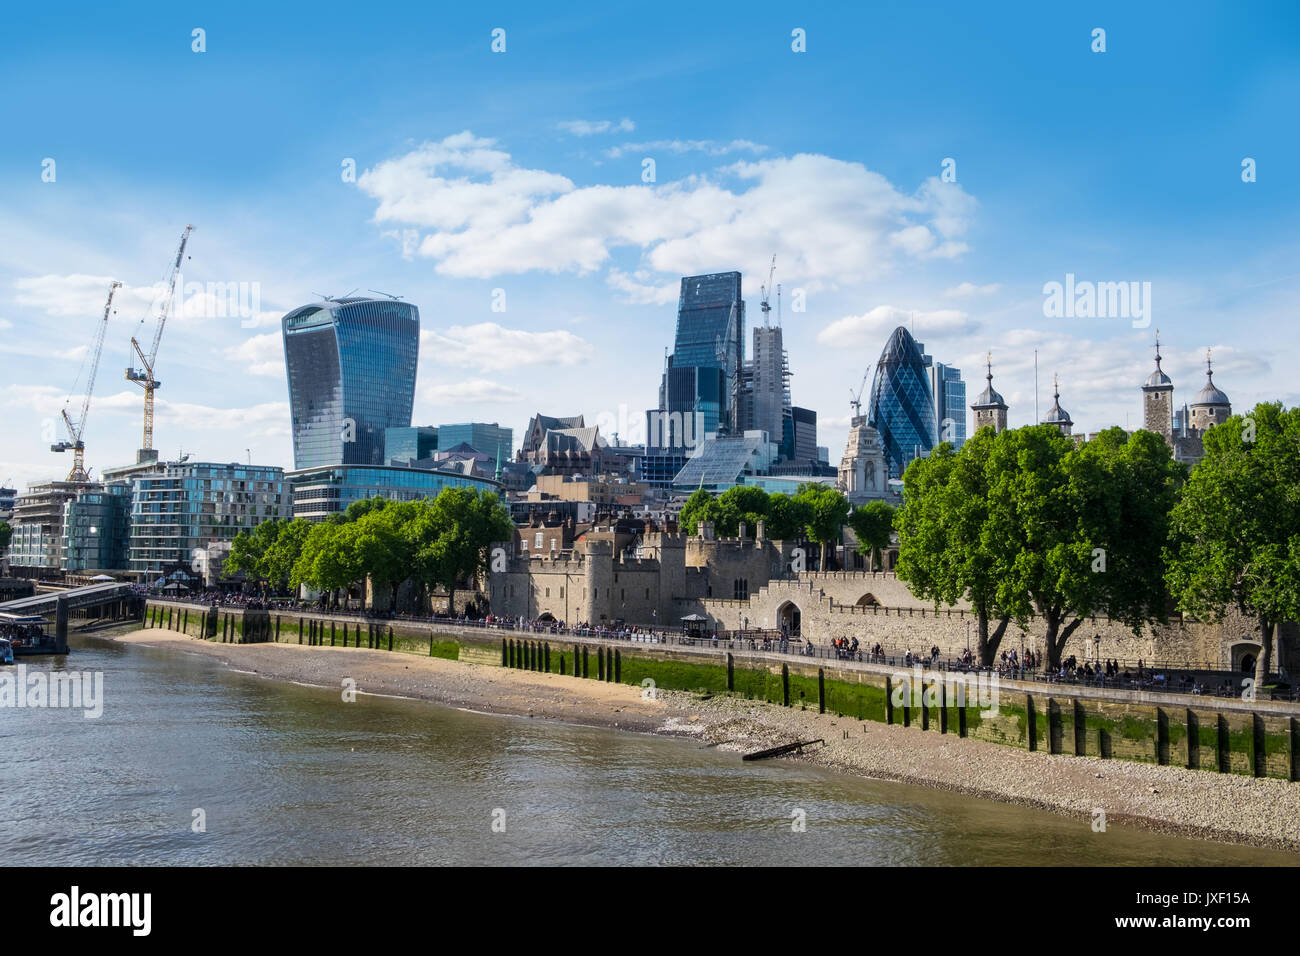 City of London financial district from River Thames, showing recent additions to the london skyline. Stock Photo